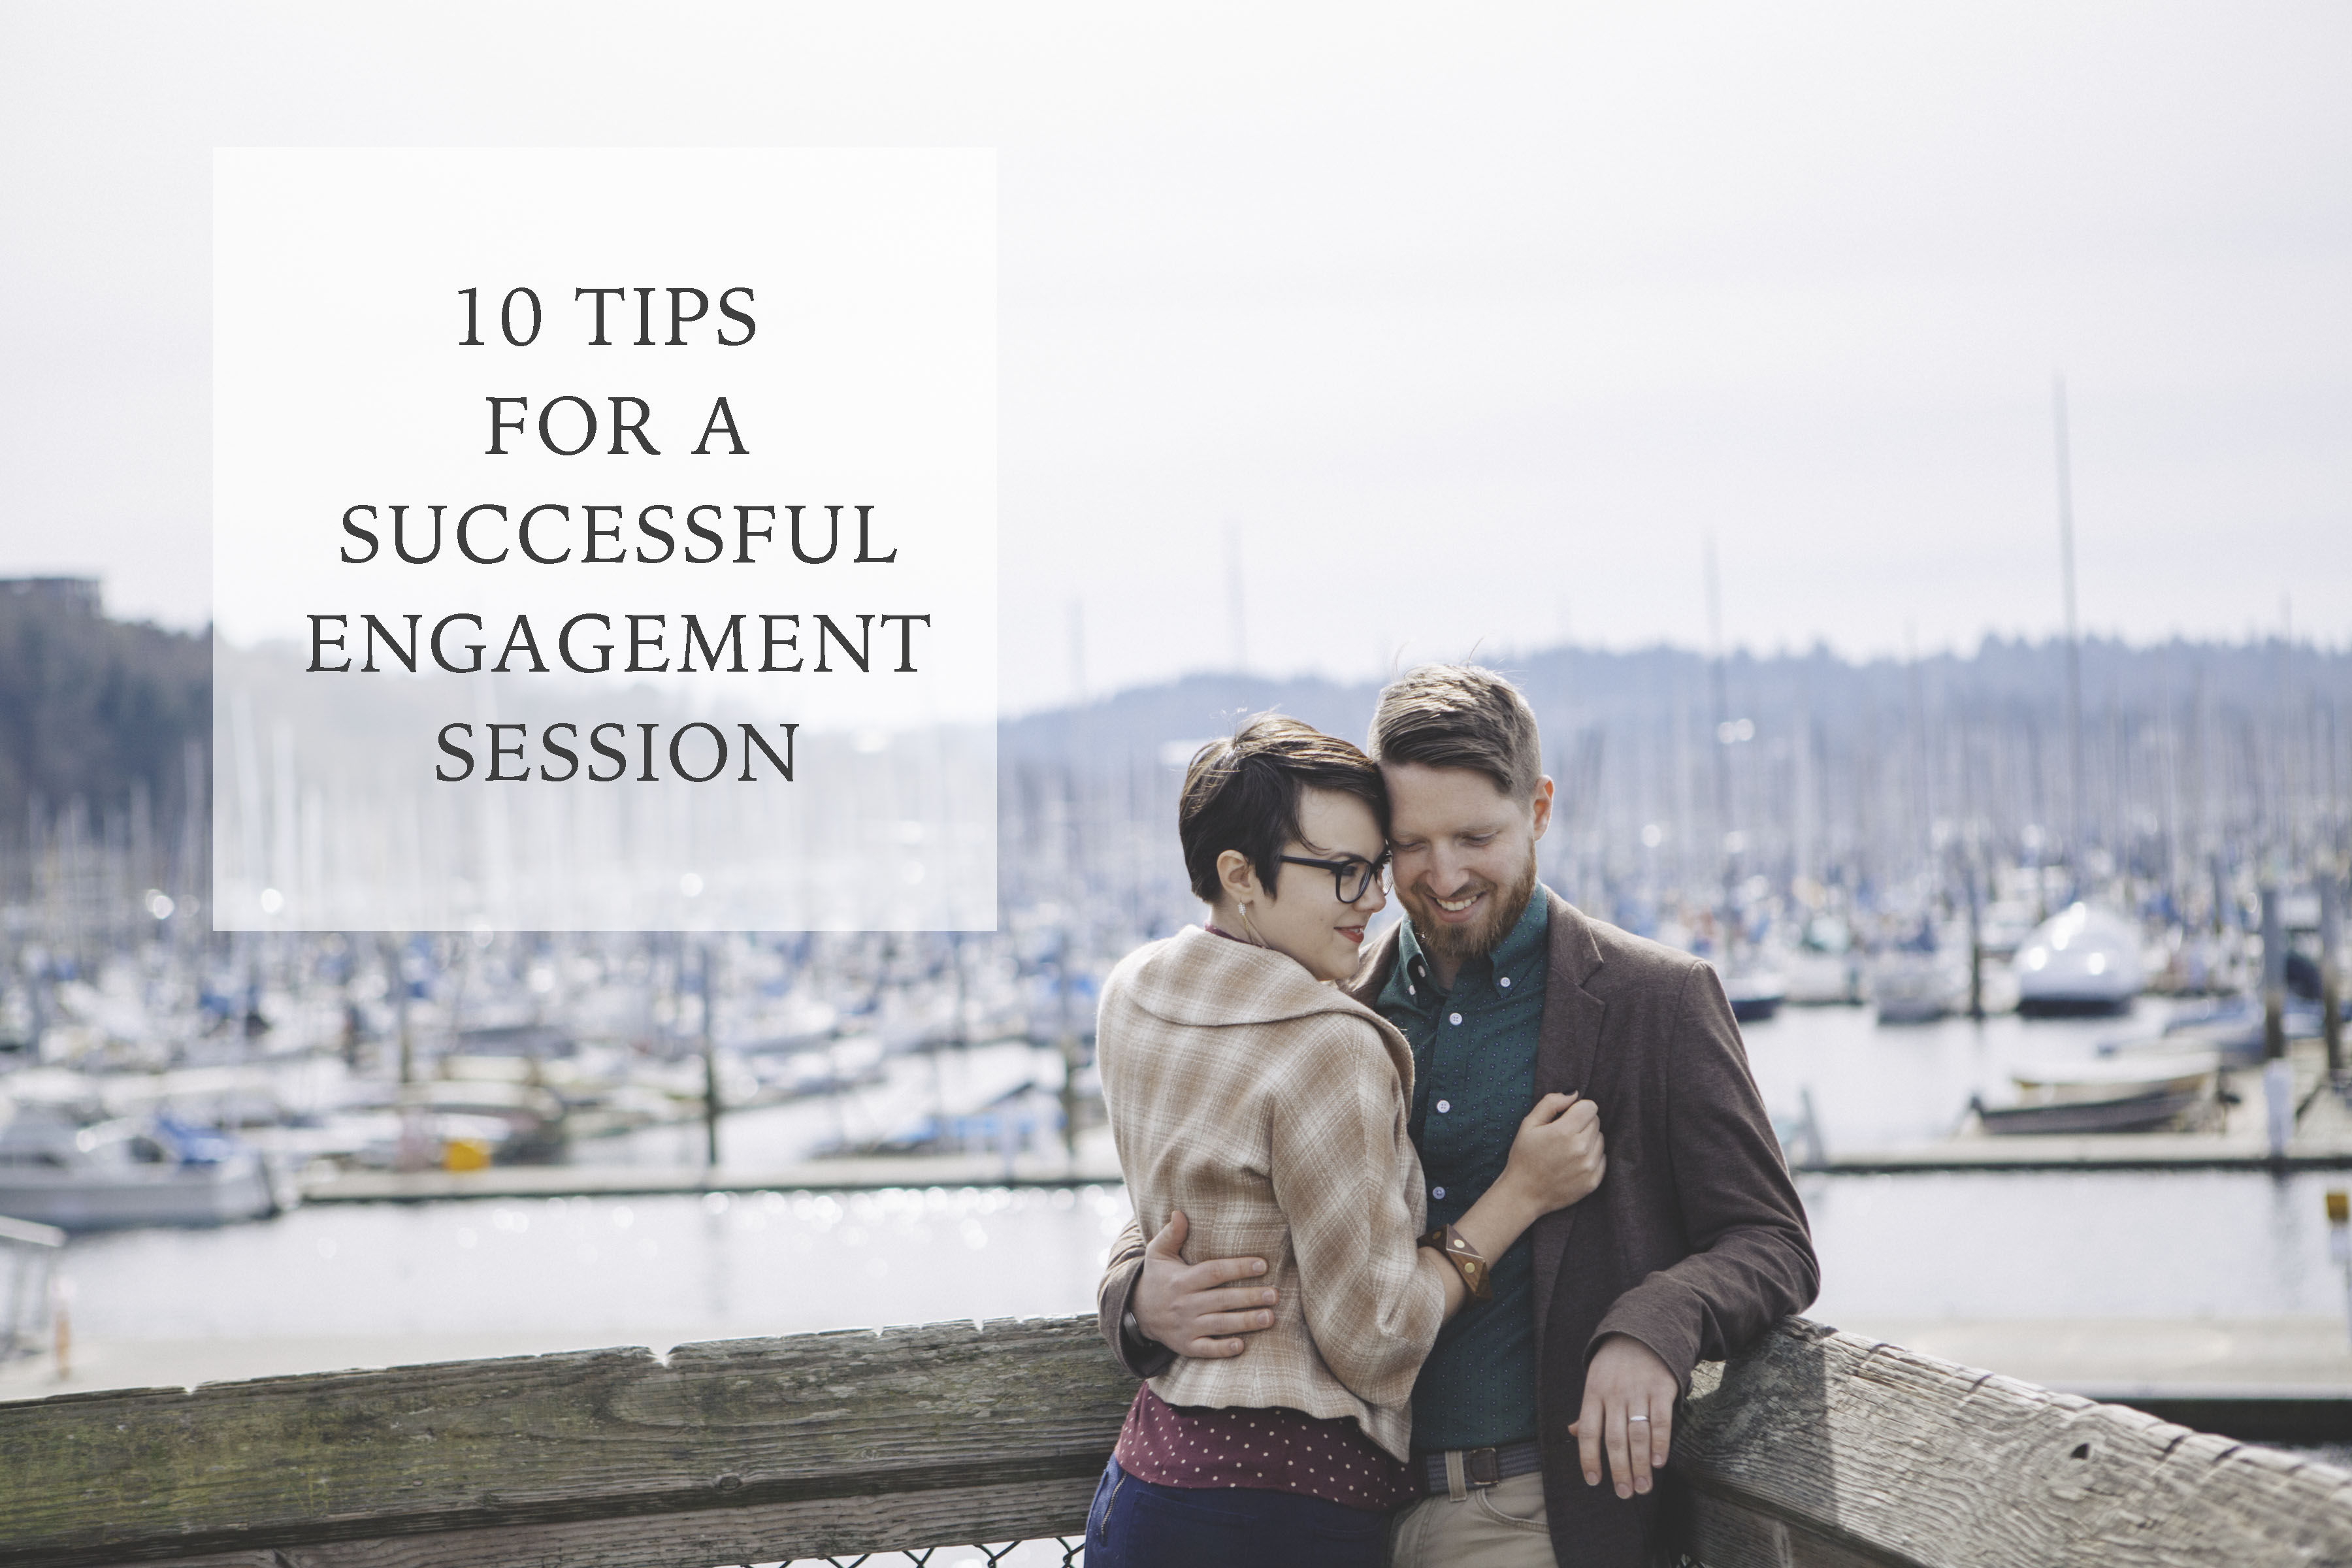 10 tips for a successful engagement session